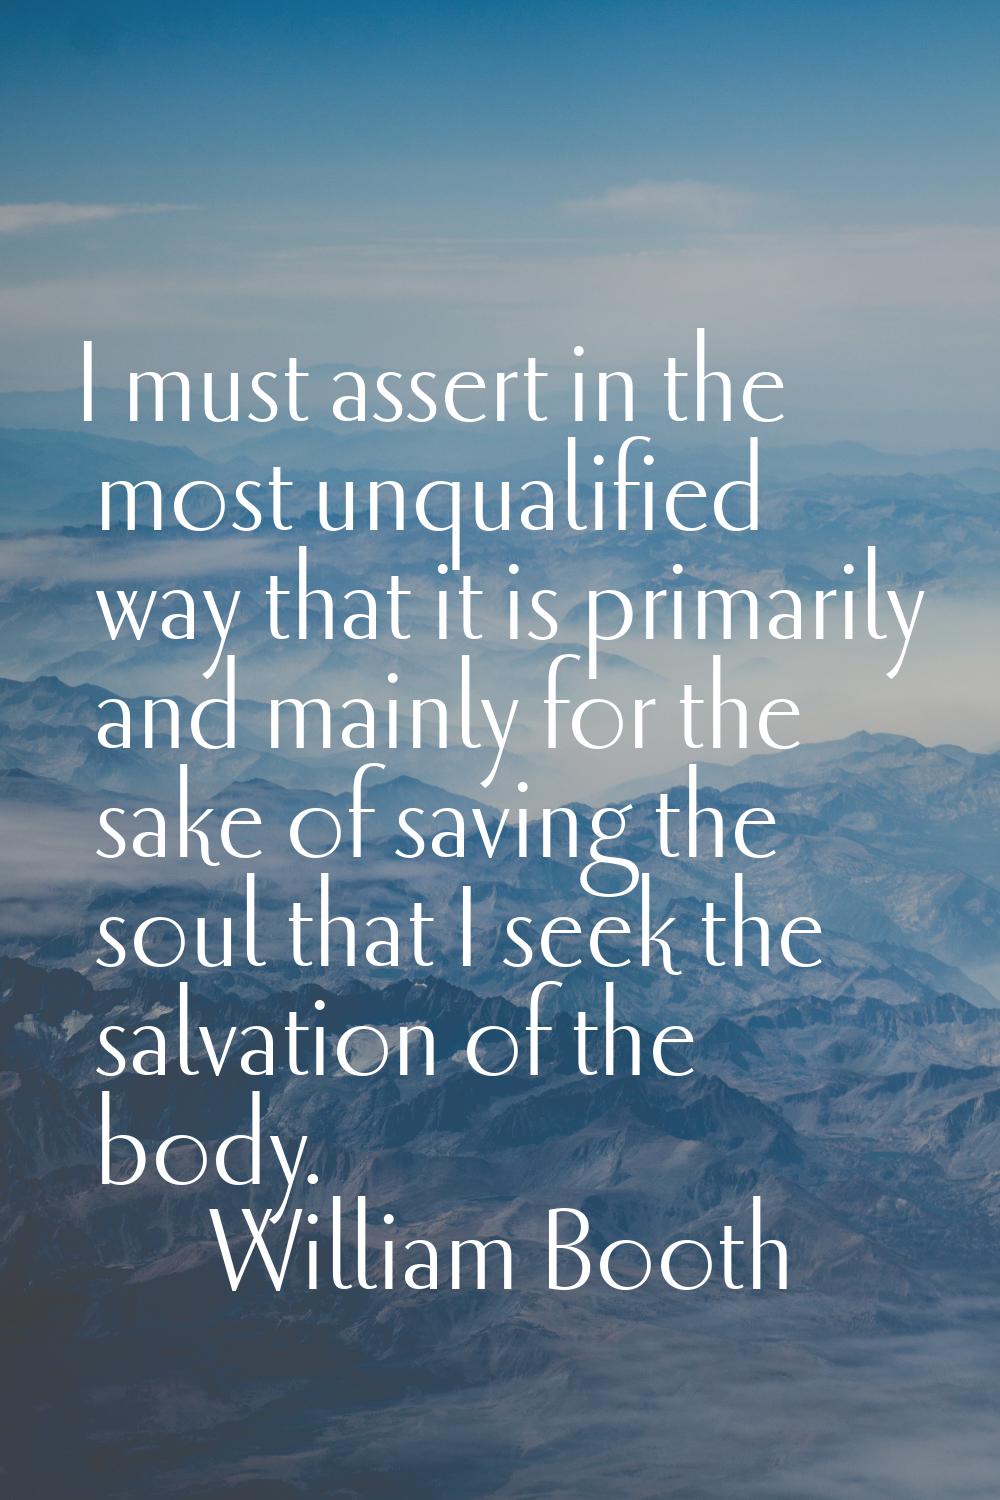 I must assert in the most unqualified way that it is primarily and mainly for the sake of saving th